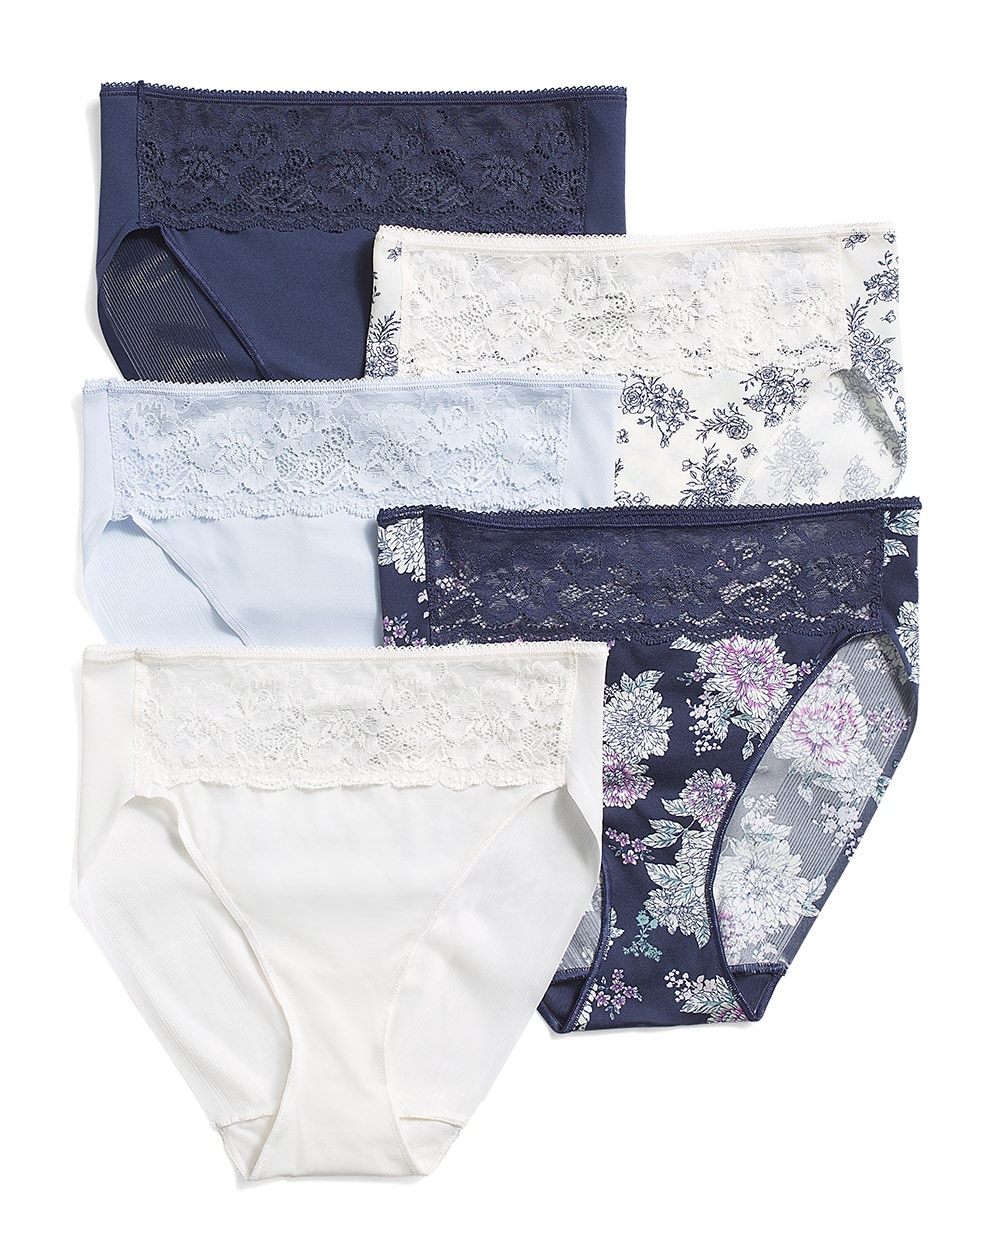 Vanishing Edge Microfiber High-Leg Briefs with Lace 5 Pack